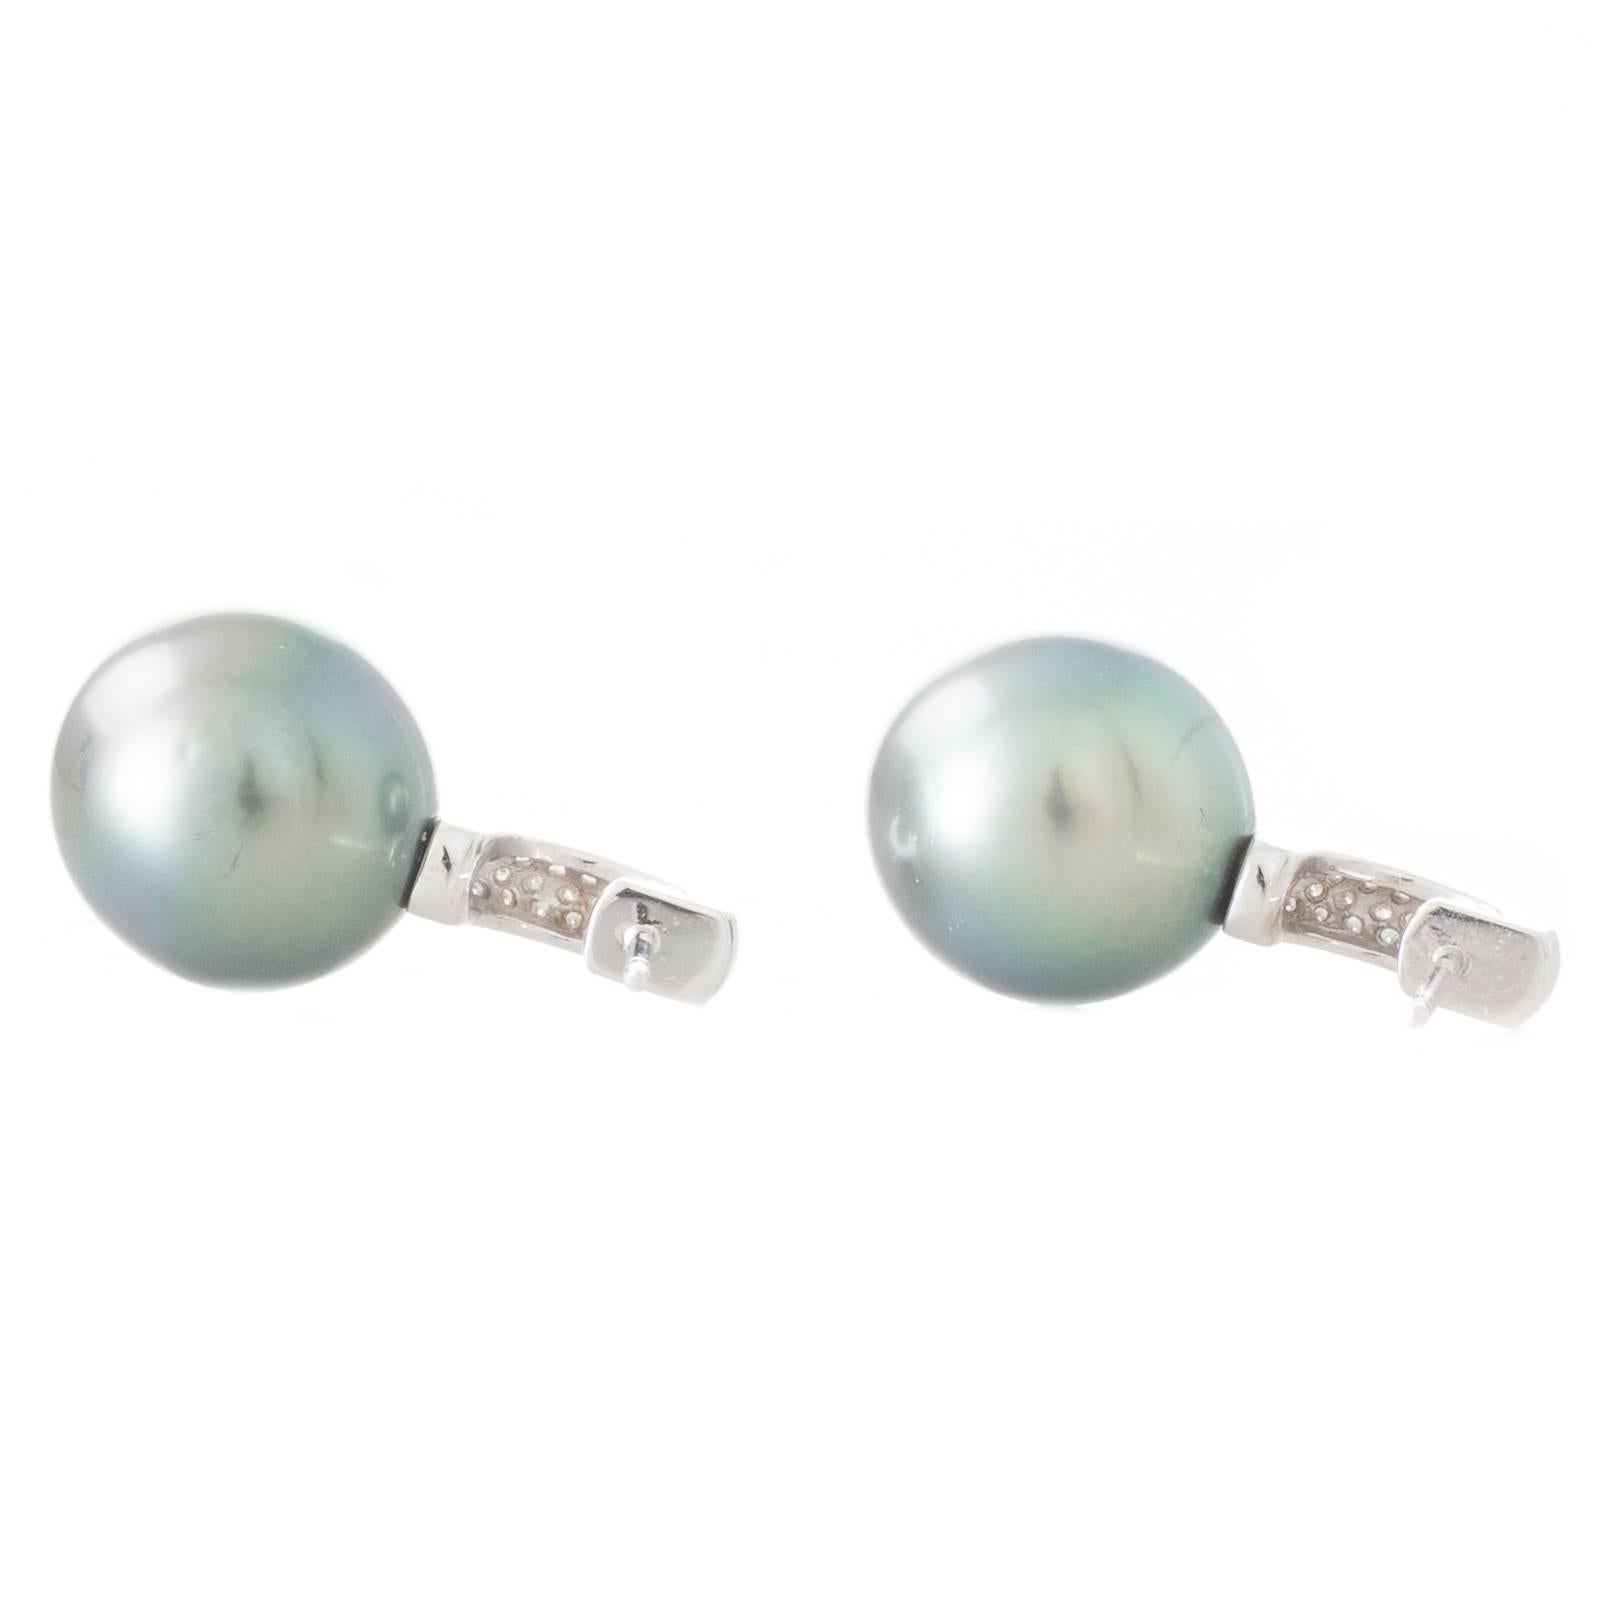 A pair of large drop shaped green Tahitian South Sea pearls with blue overtones measuring 12 - 13mm with a high lustre and very few natural surface marks set beneath half hoop stud drop fittings pave set with diamonds in 18ct white gold. Total